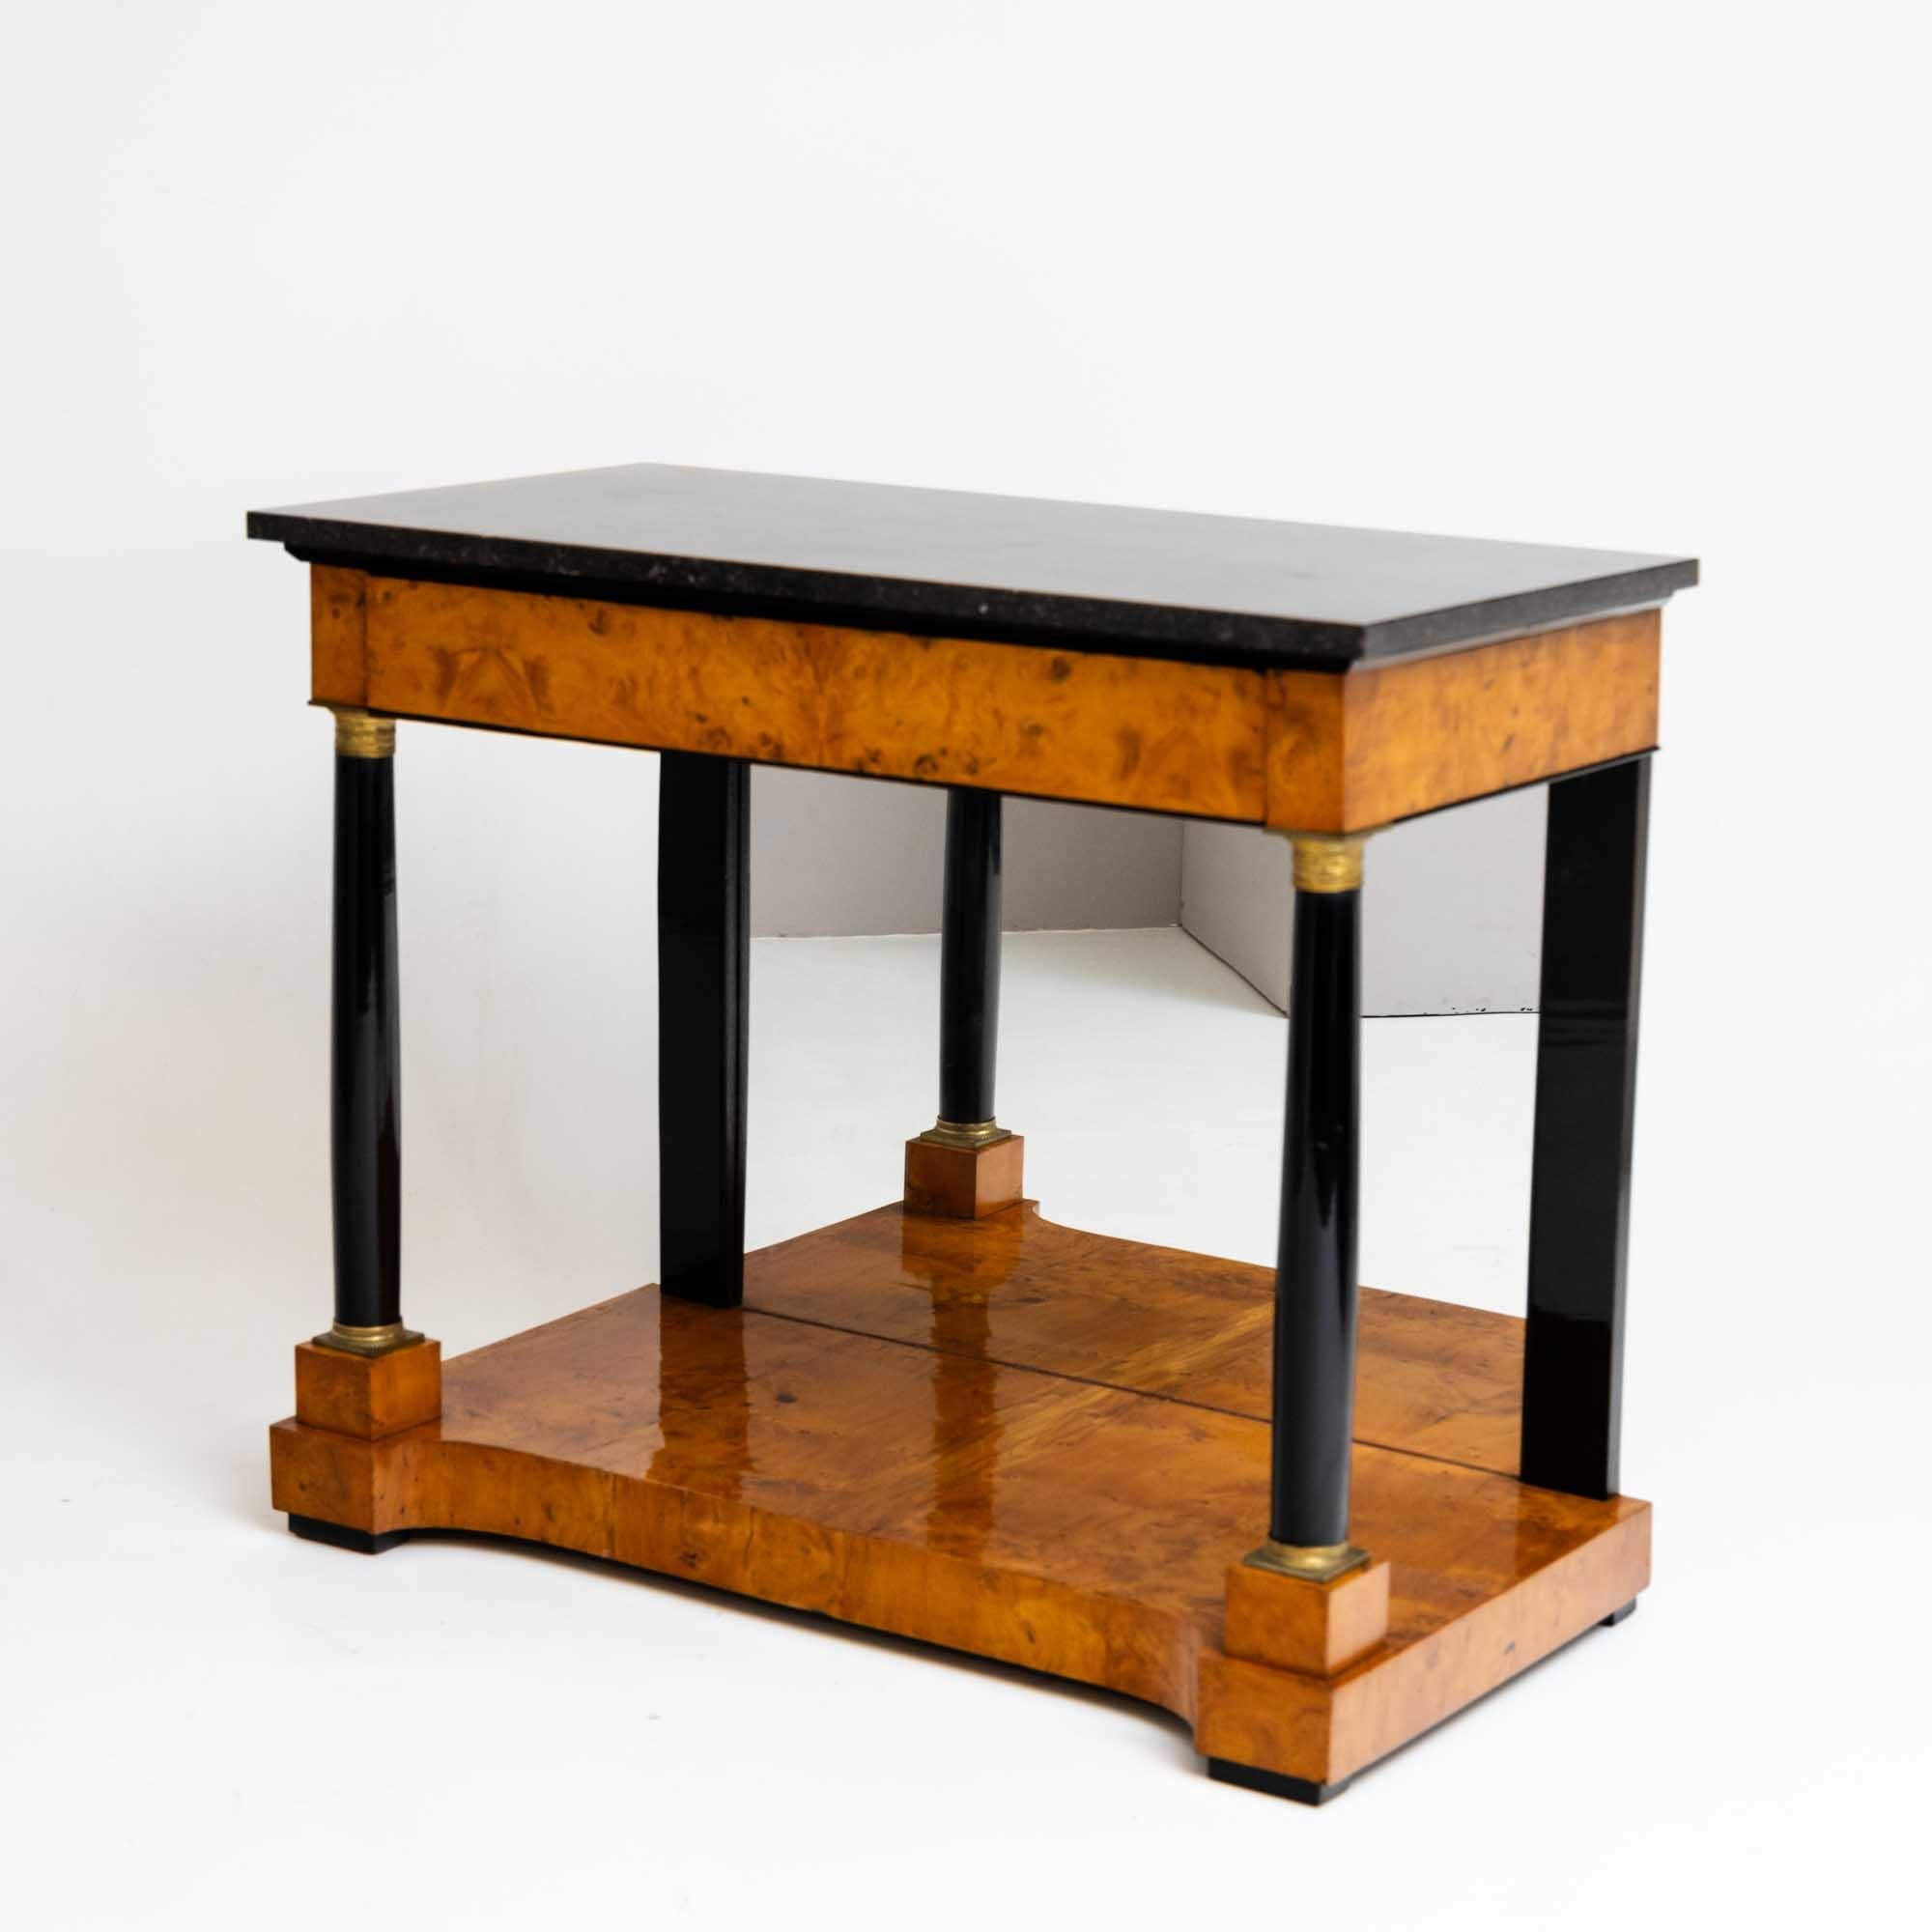 Elegant Biedermeier console table with dark granite top and mirrored back panel. The chest of drawers is veneered in burr walnut. The smooth frame is fitted with a drawer, which rests on ebonized columns with brass capitals and bases and pilasters